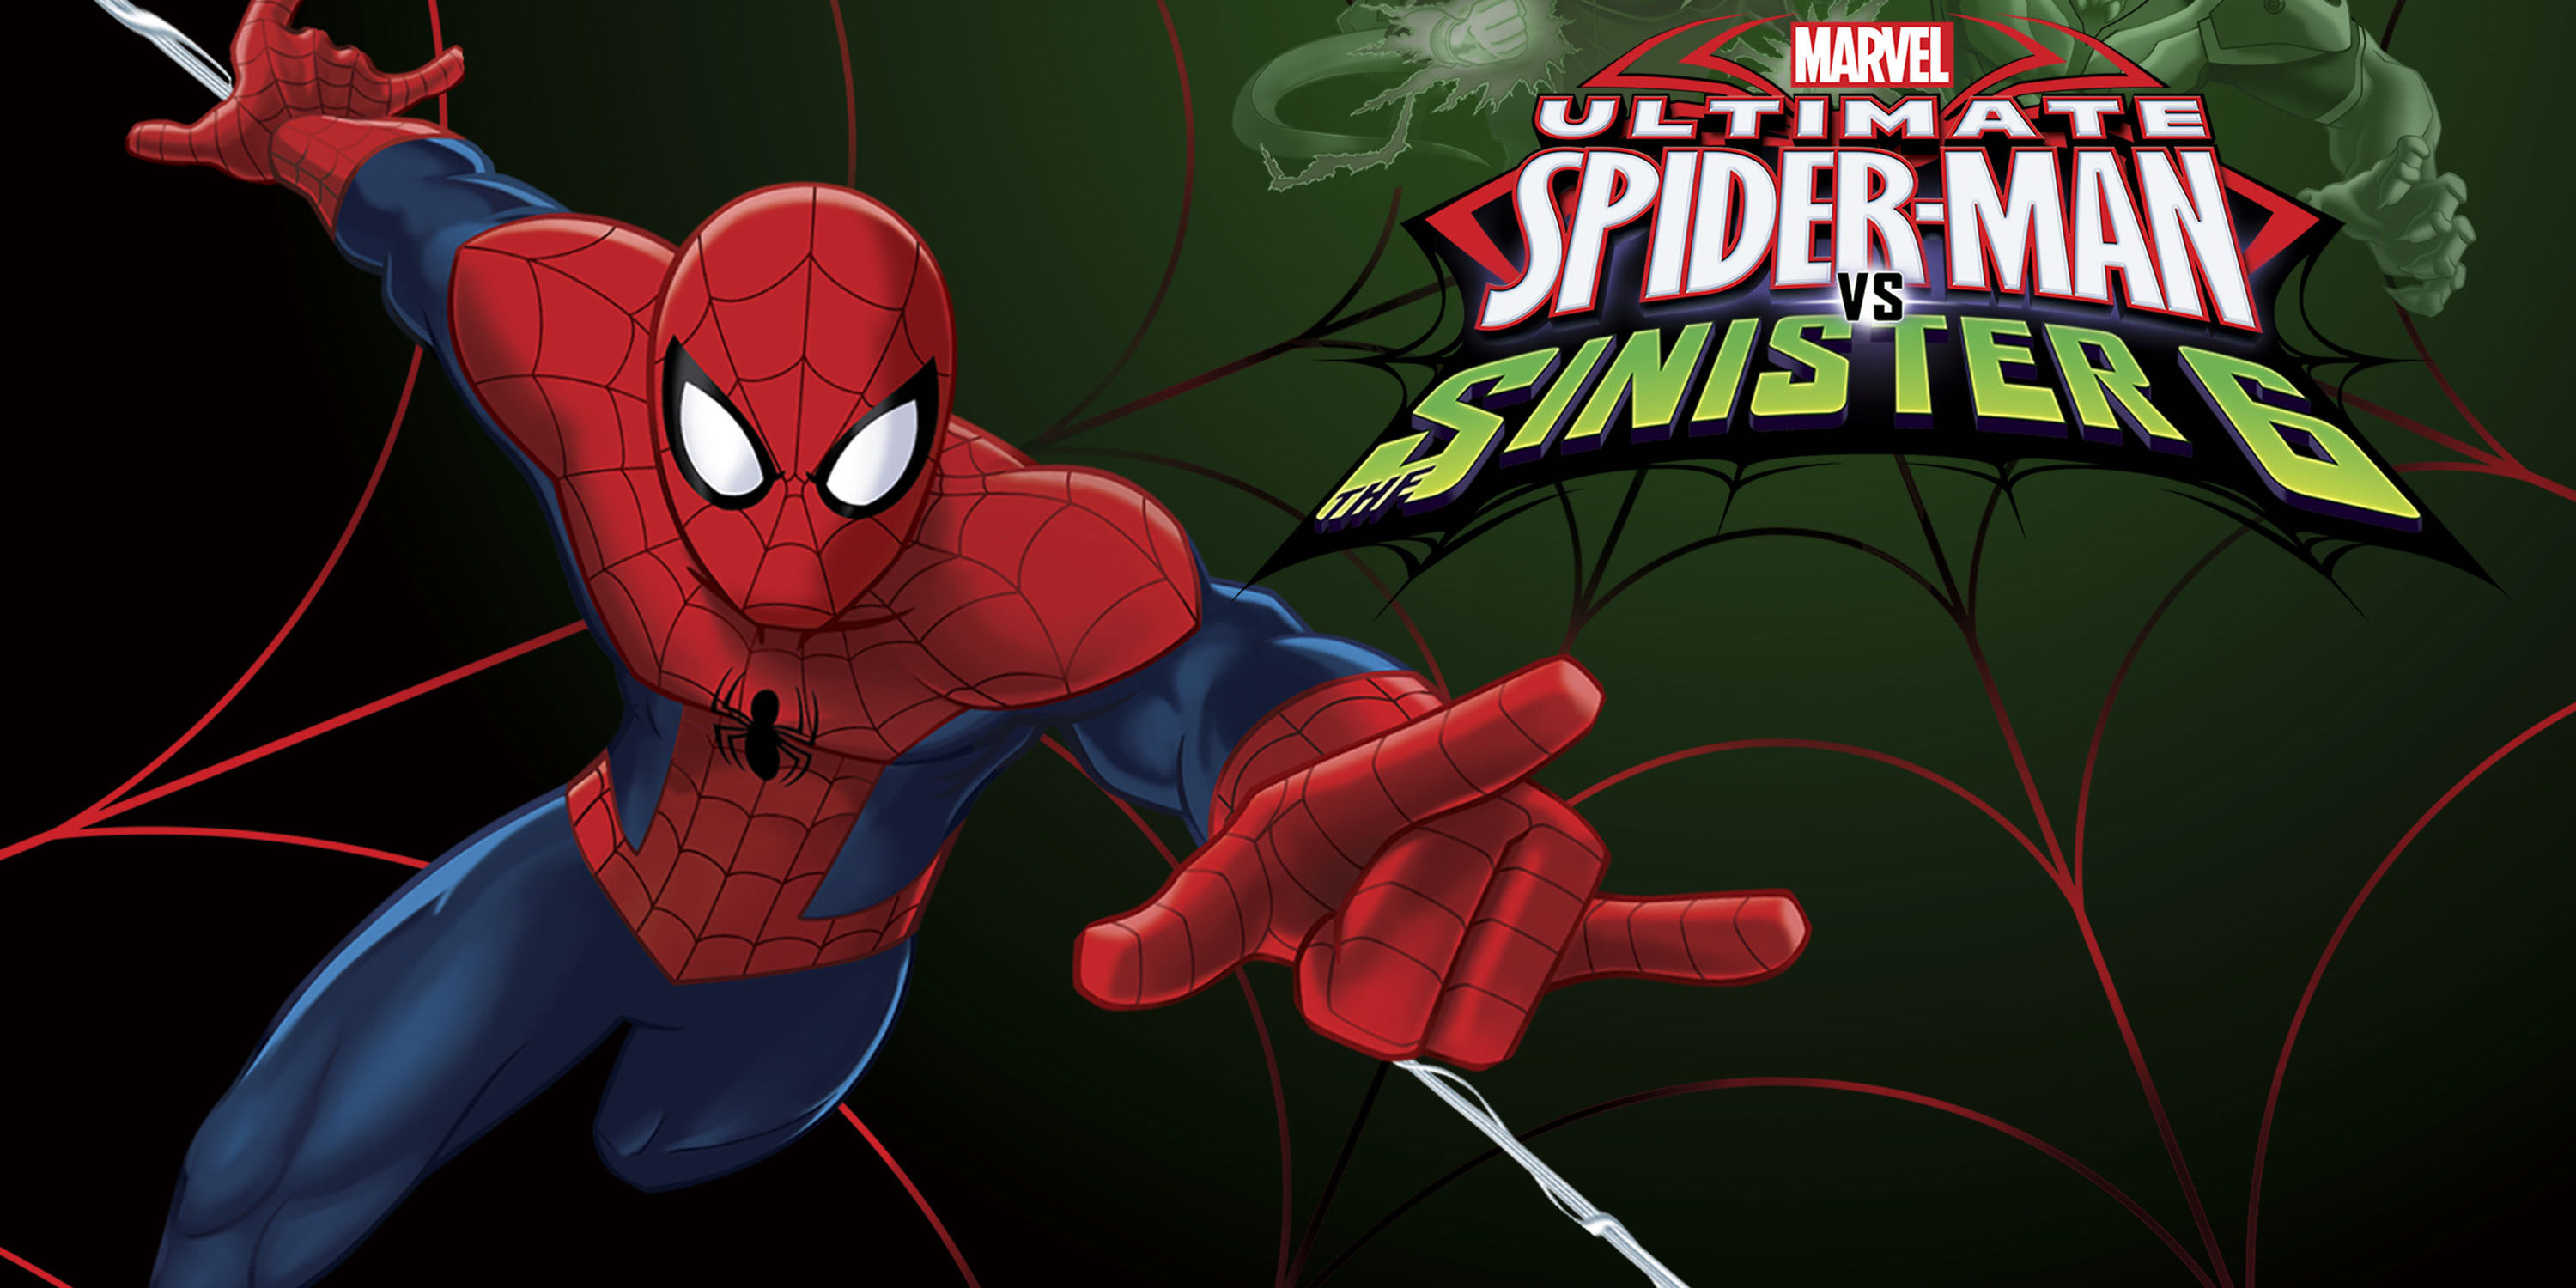 Review: Marvel's ULTIMATE SPIDER-MAN VS. The Sinister 6 "Return to the